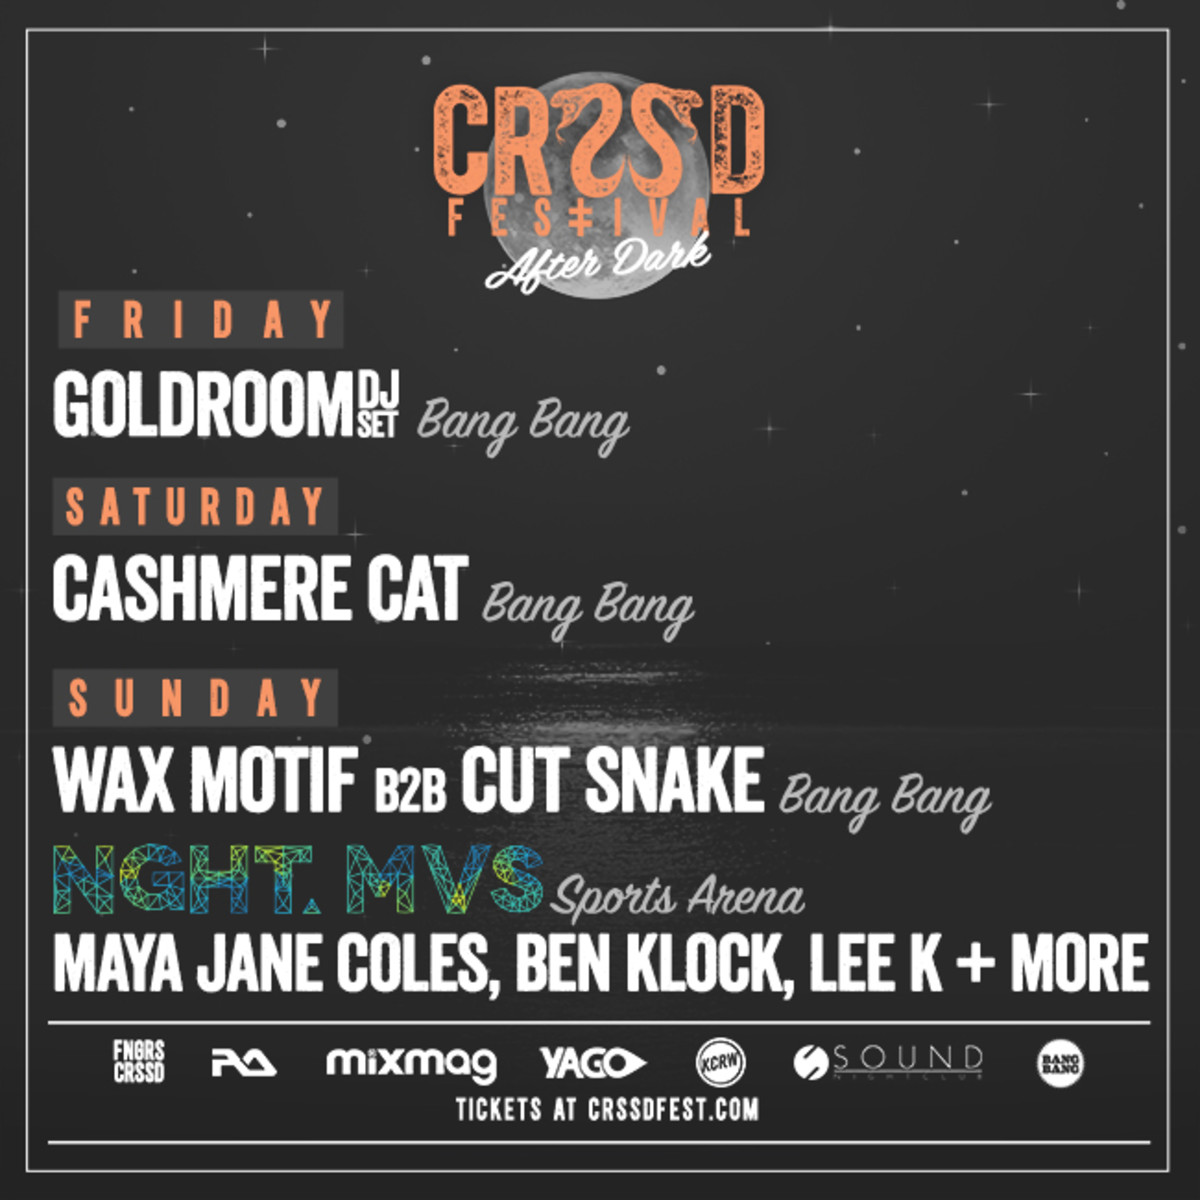 CRSSD Afterparty flyer updated